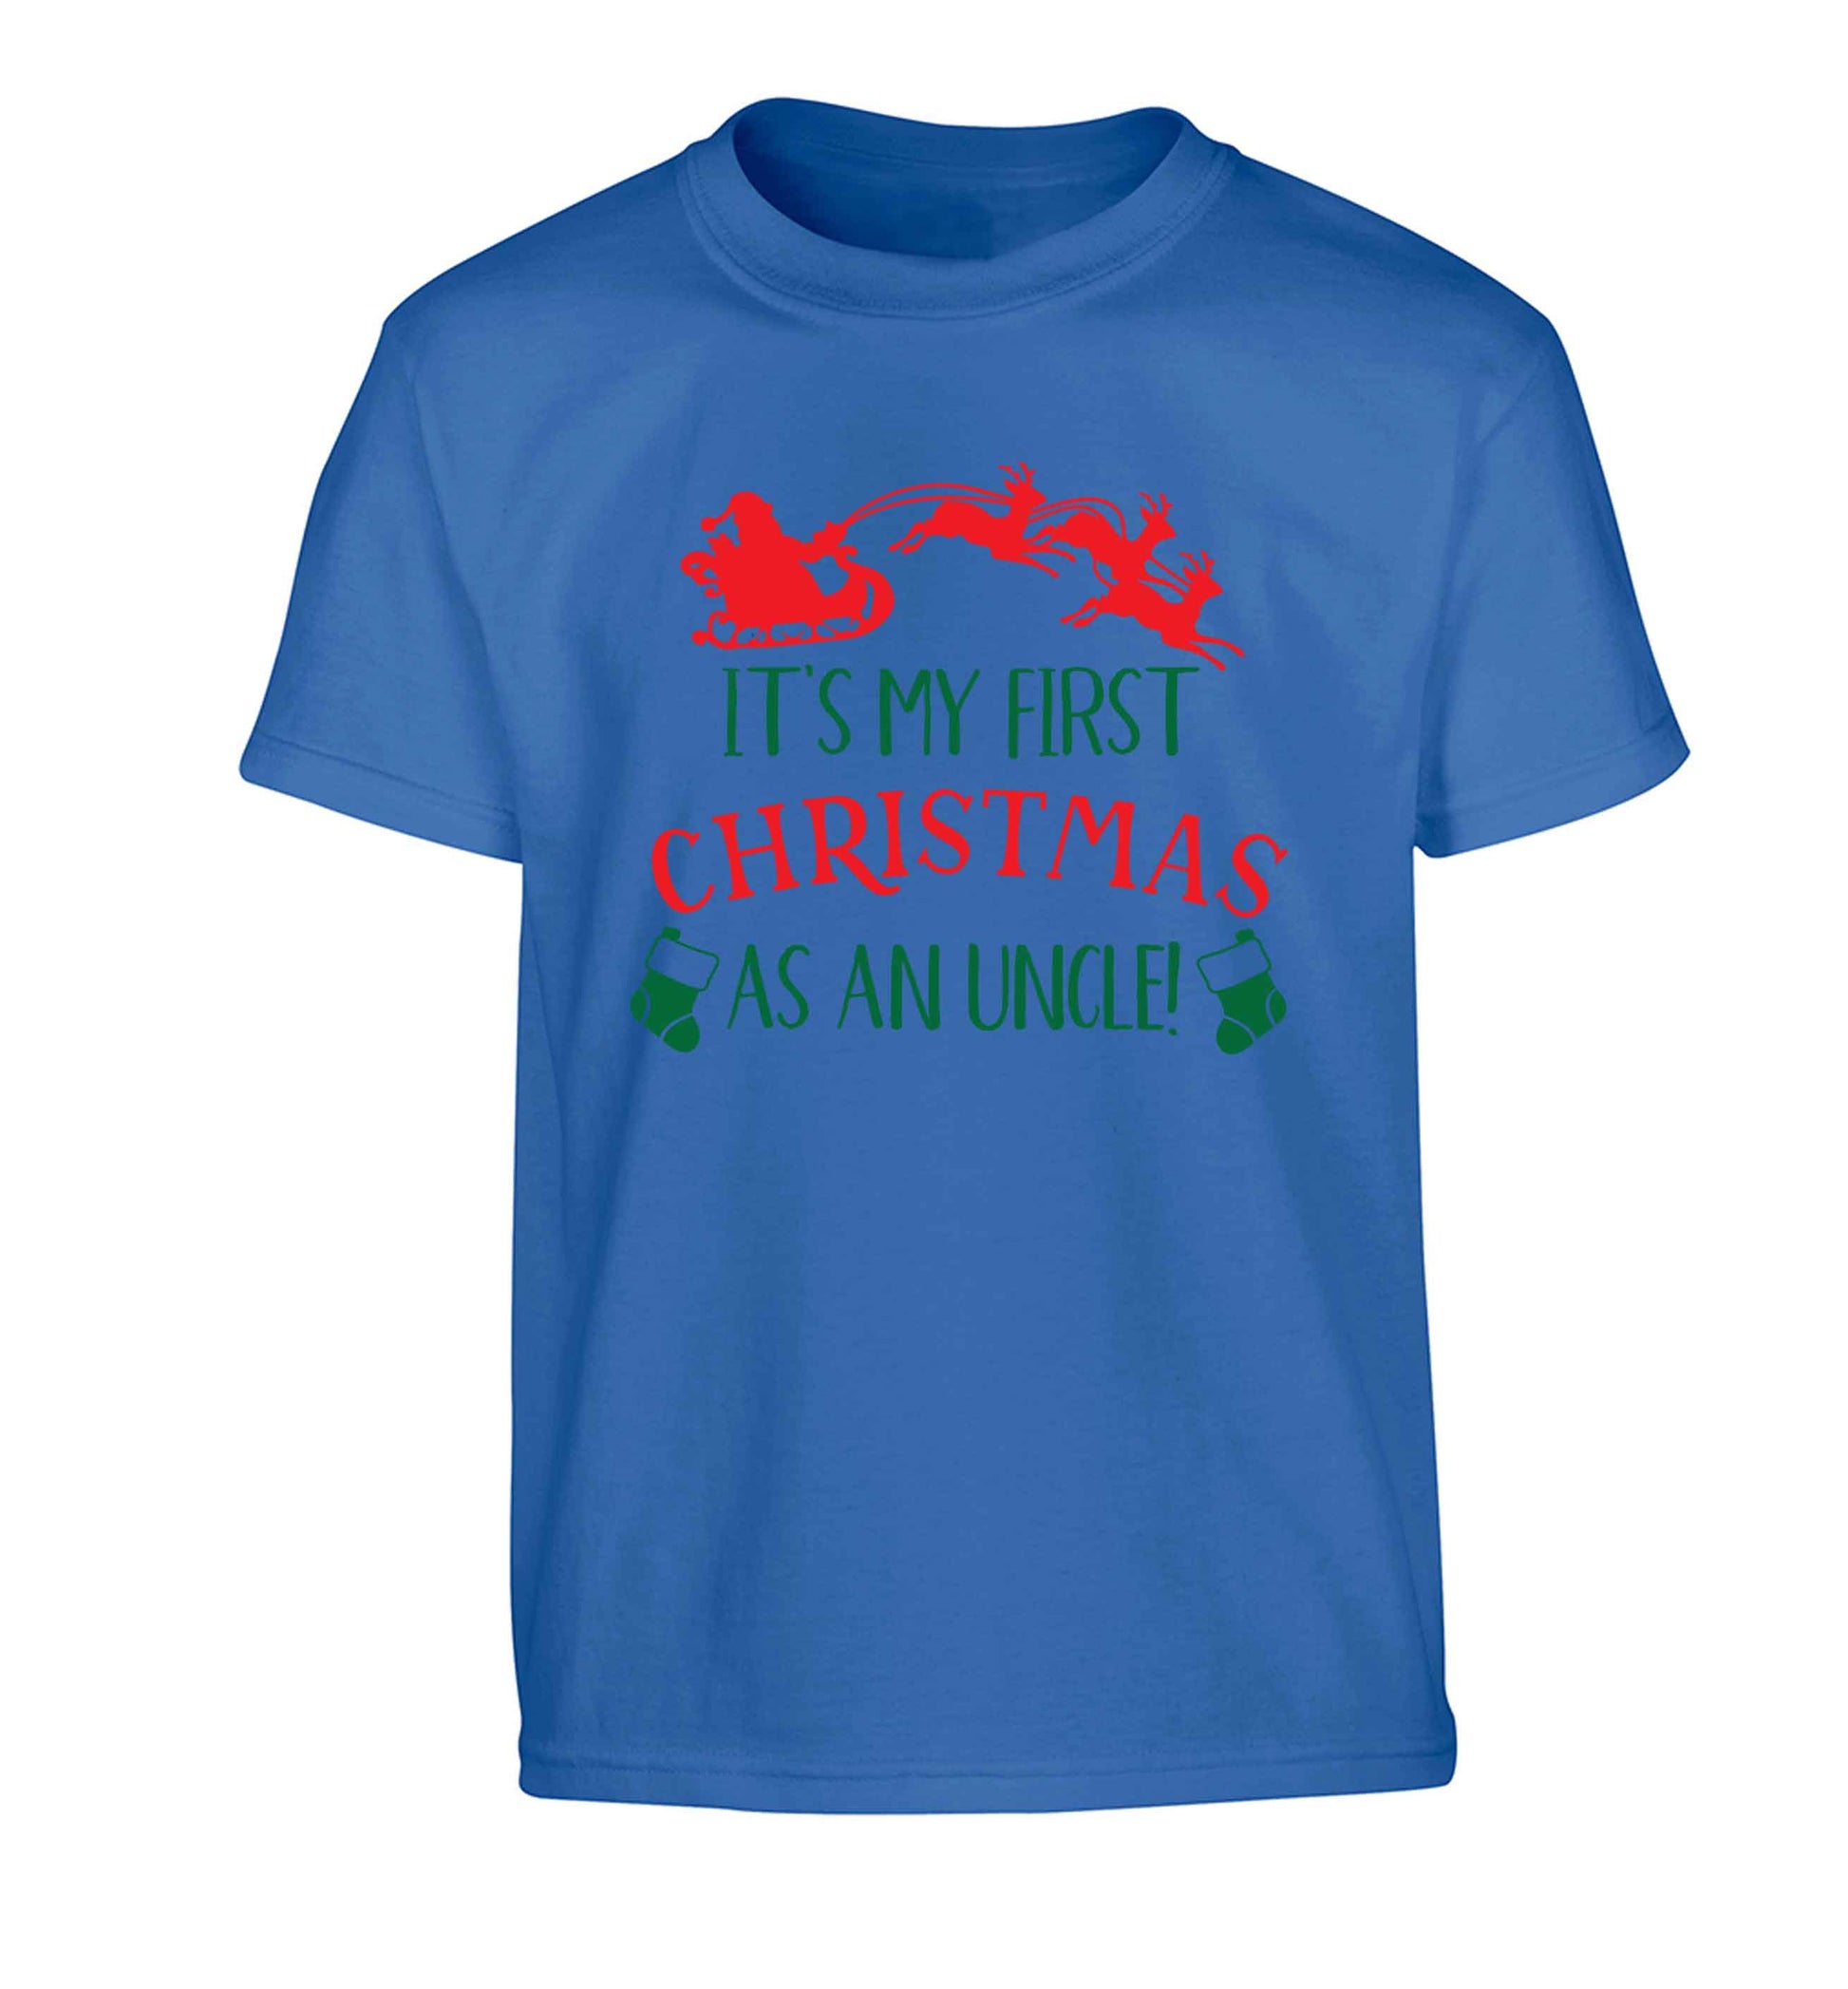 It's my first Christmas as an uncle! Children's blue Tshirt 12-13 Years